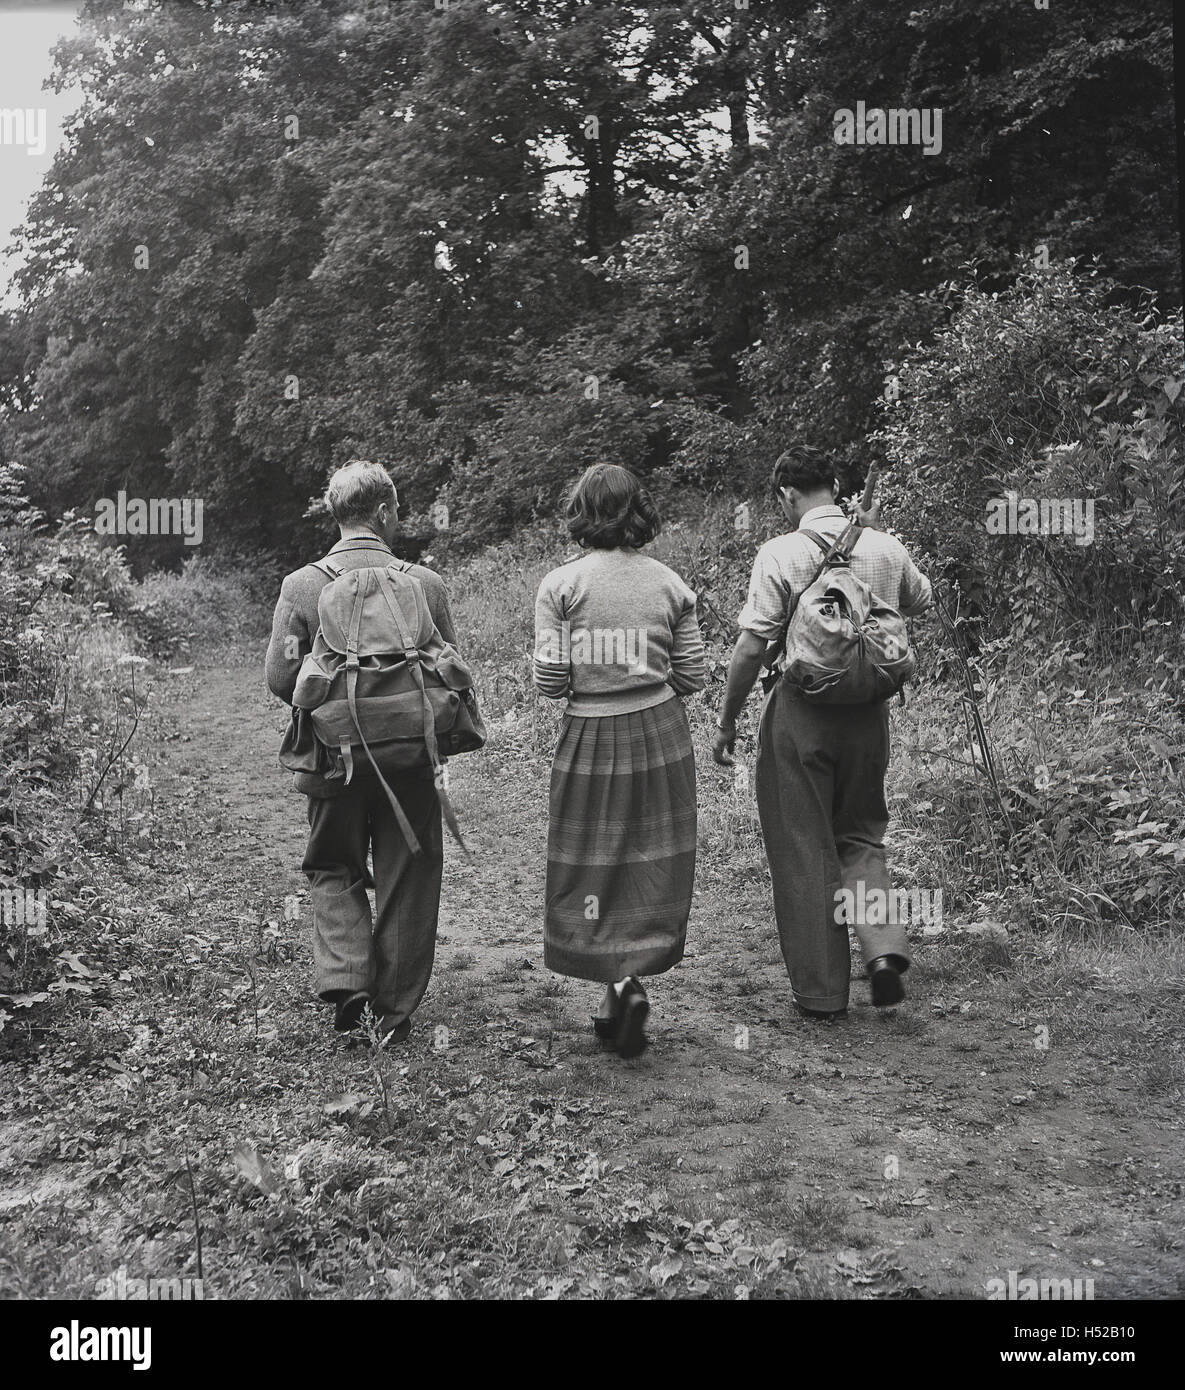 1950s, historical, three people out walking or rambling on a path through a forest in normal everyday clothing, two with canvas satchels on backs, England Stock Photo - Alamy